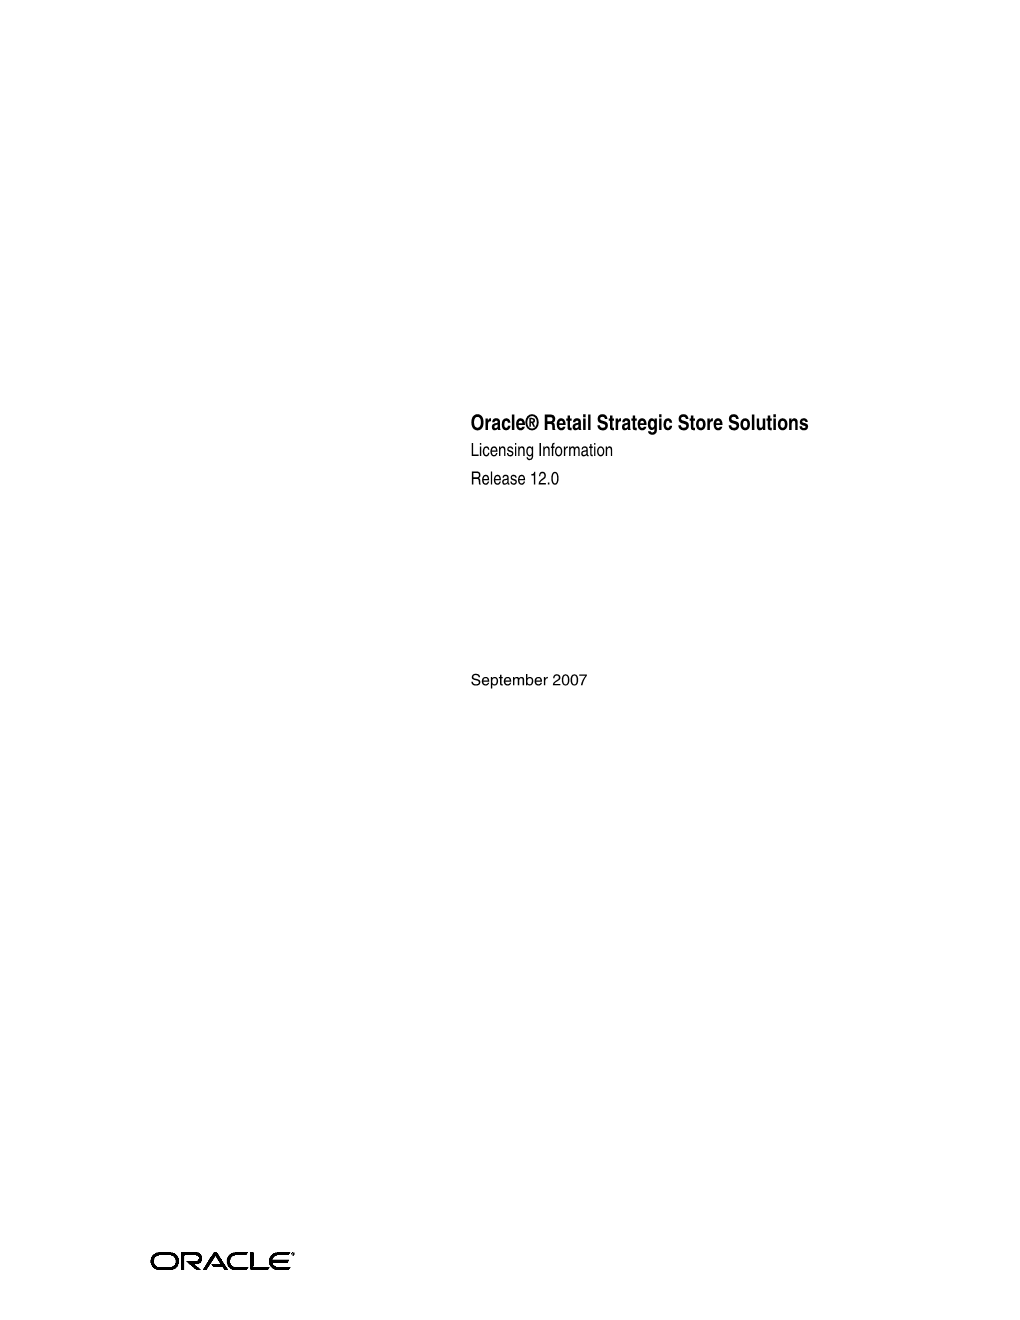 Oracle Retail Strategic Store Solutions Licensing Information Guide